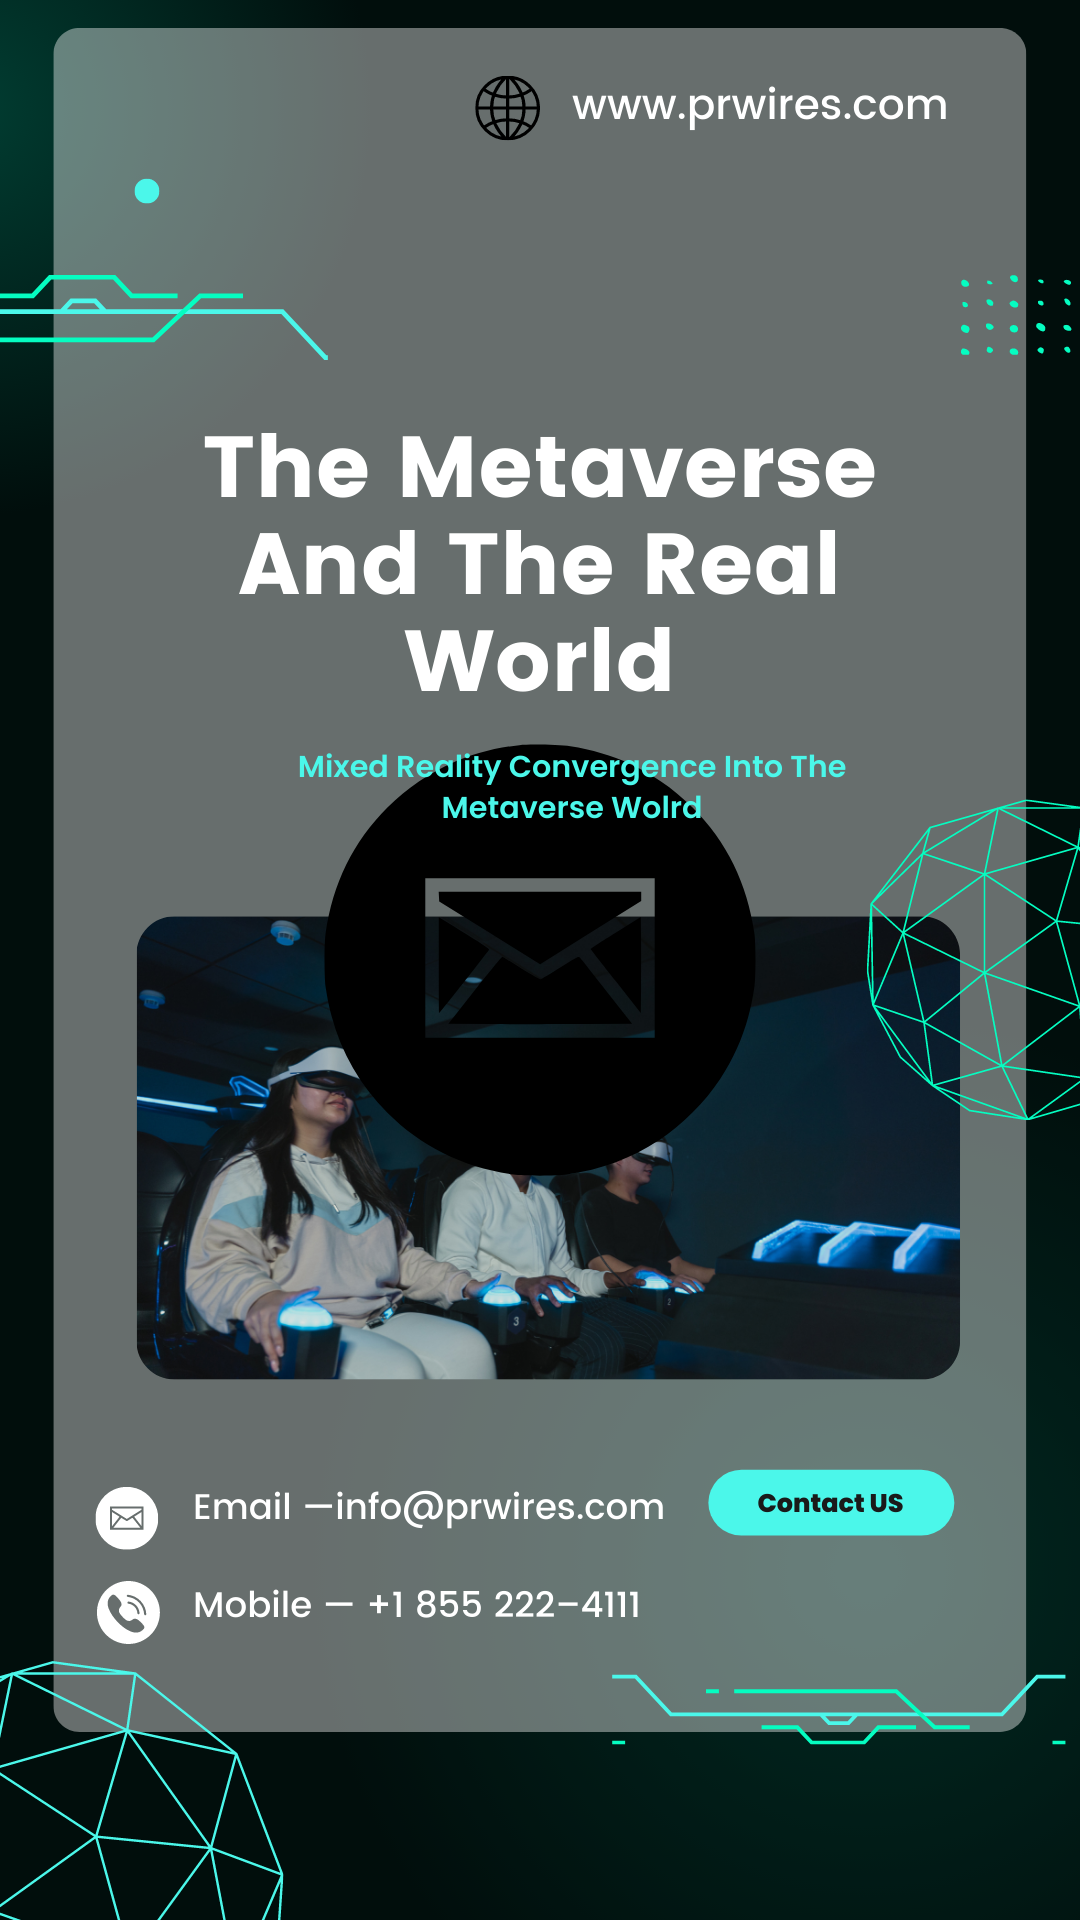 The Top 5 PR Services for Metaverse Companies and Startups